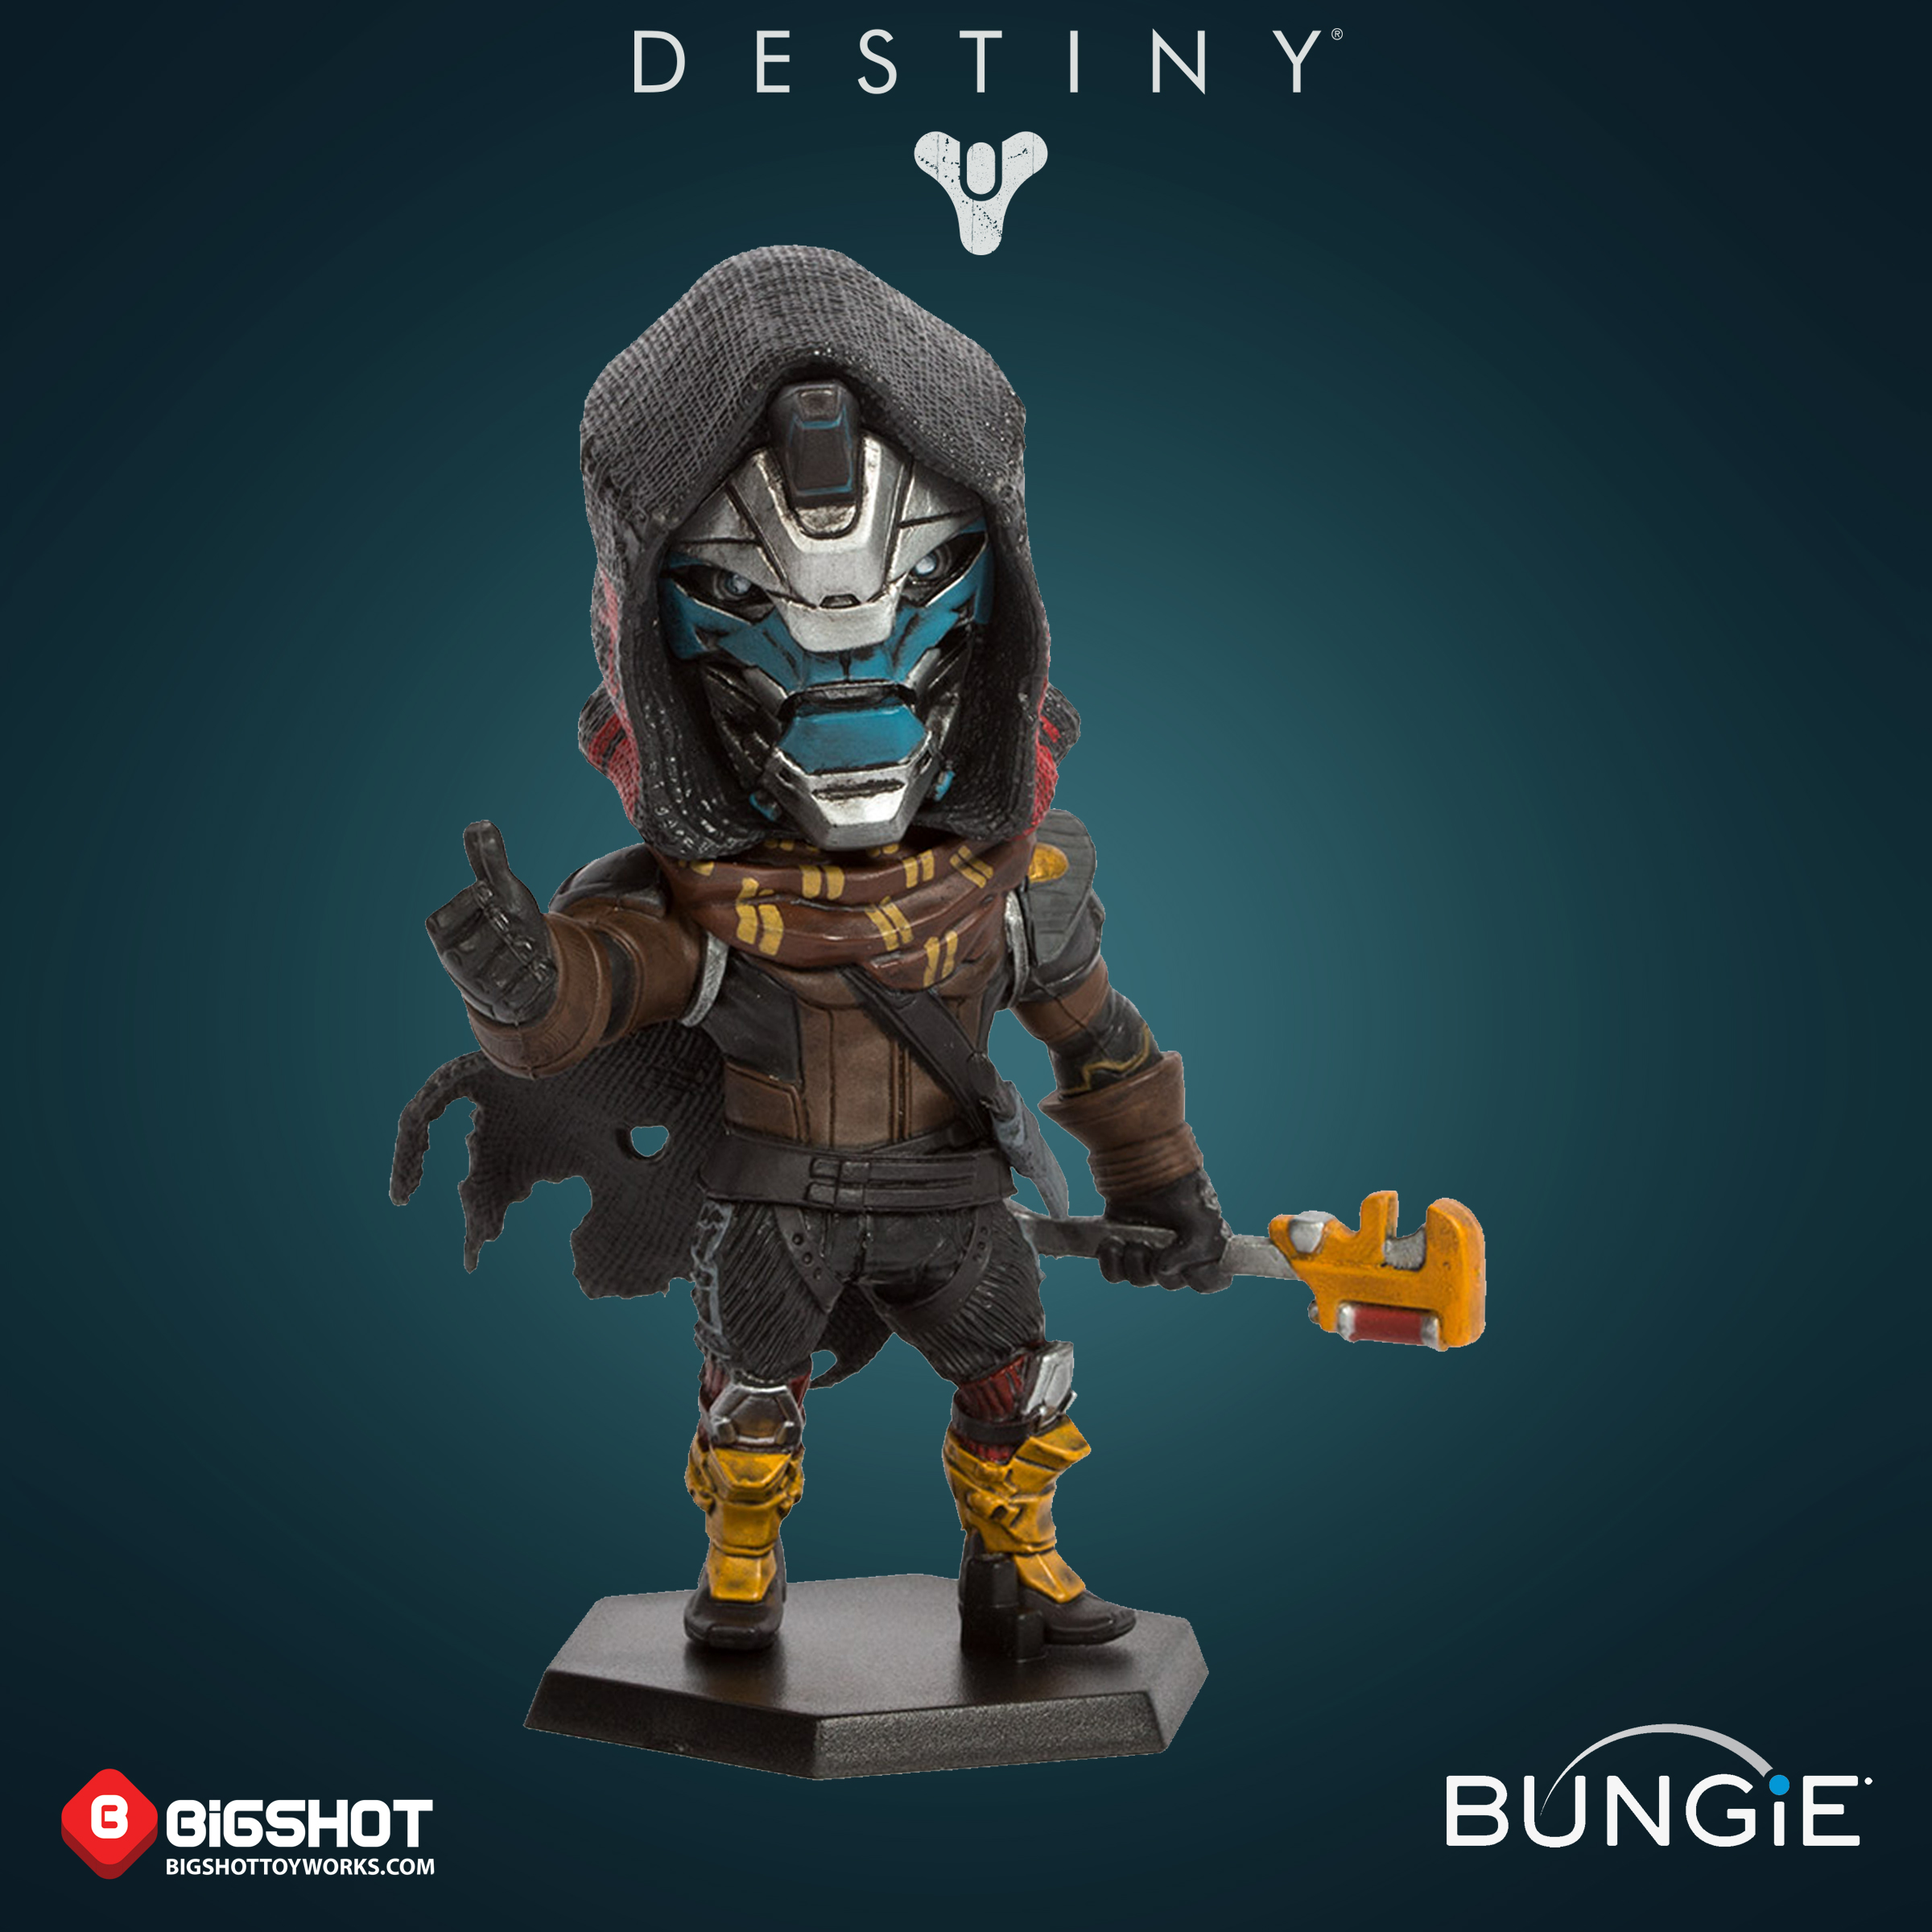 Official Bungie Statue Figurine for sale online Destiny 2 Sweeper Bot Vinyl Figure 4" Tall 